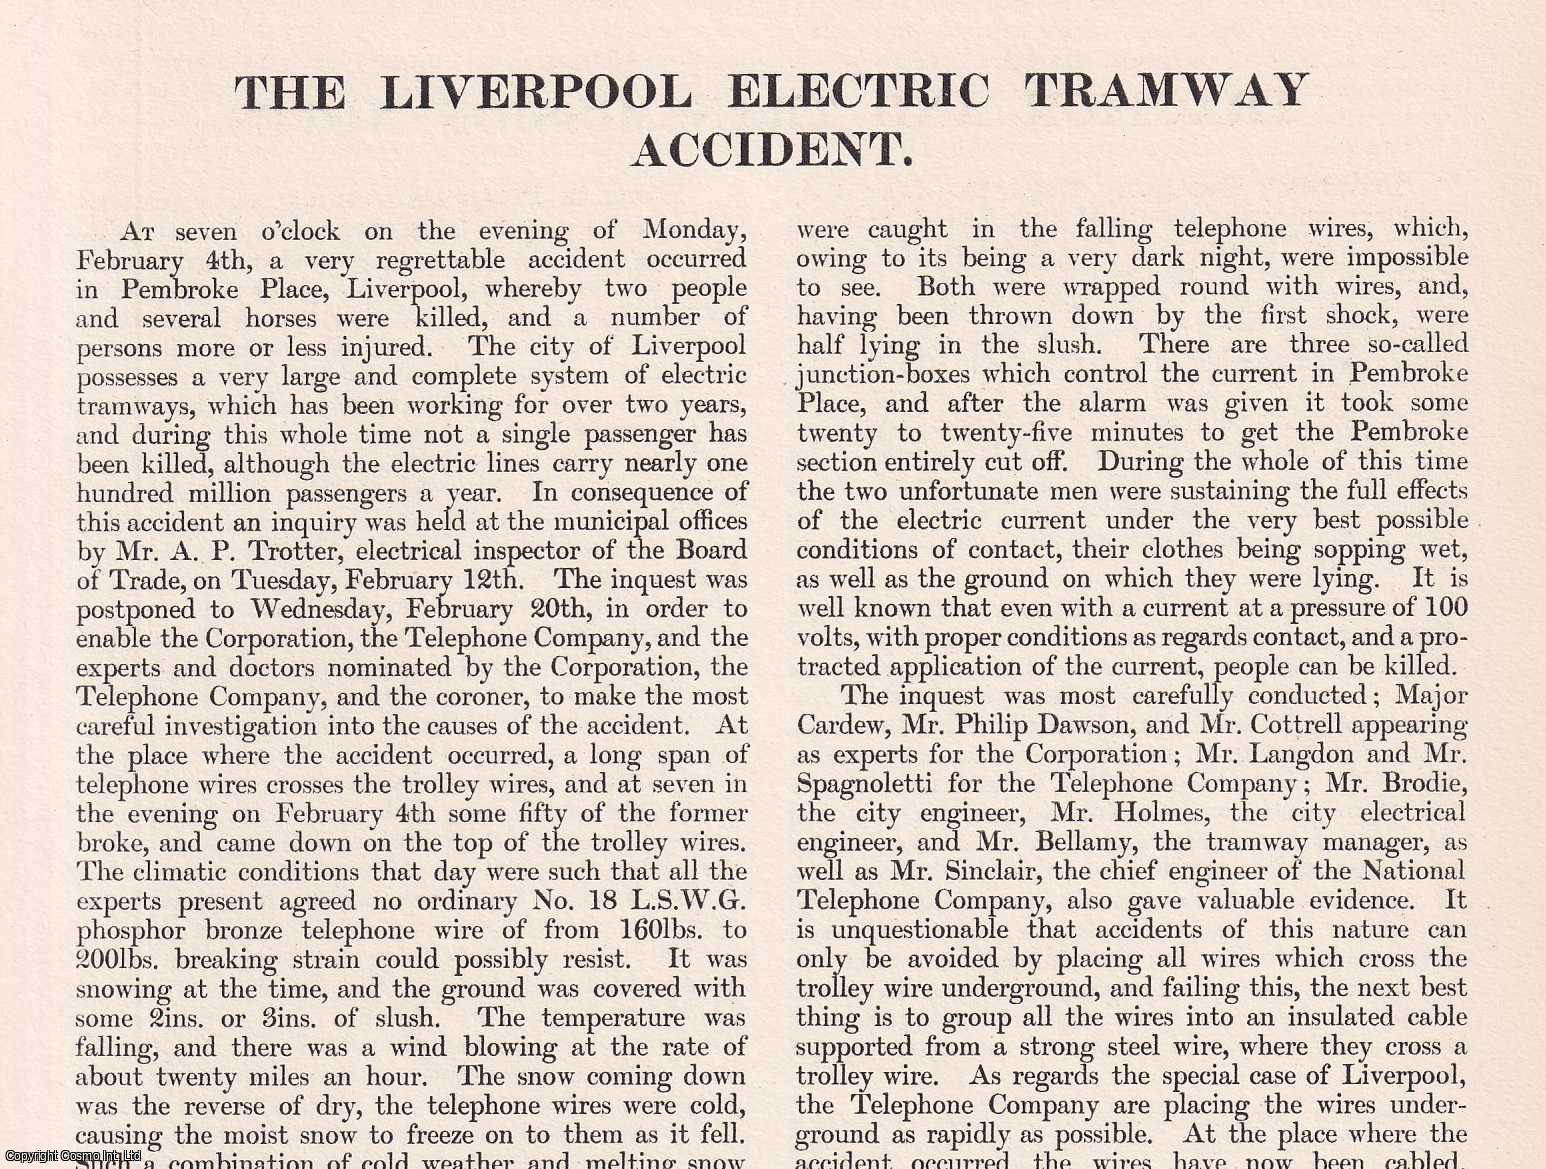 No Author Stated - The Liverpool Electric Tramway Accident. An original article from Engineering, 1901.